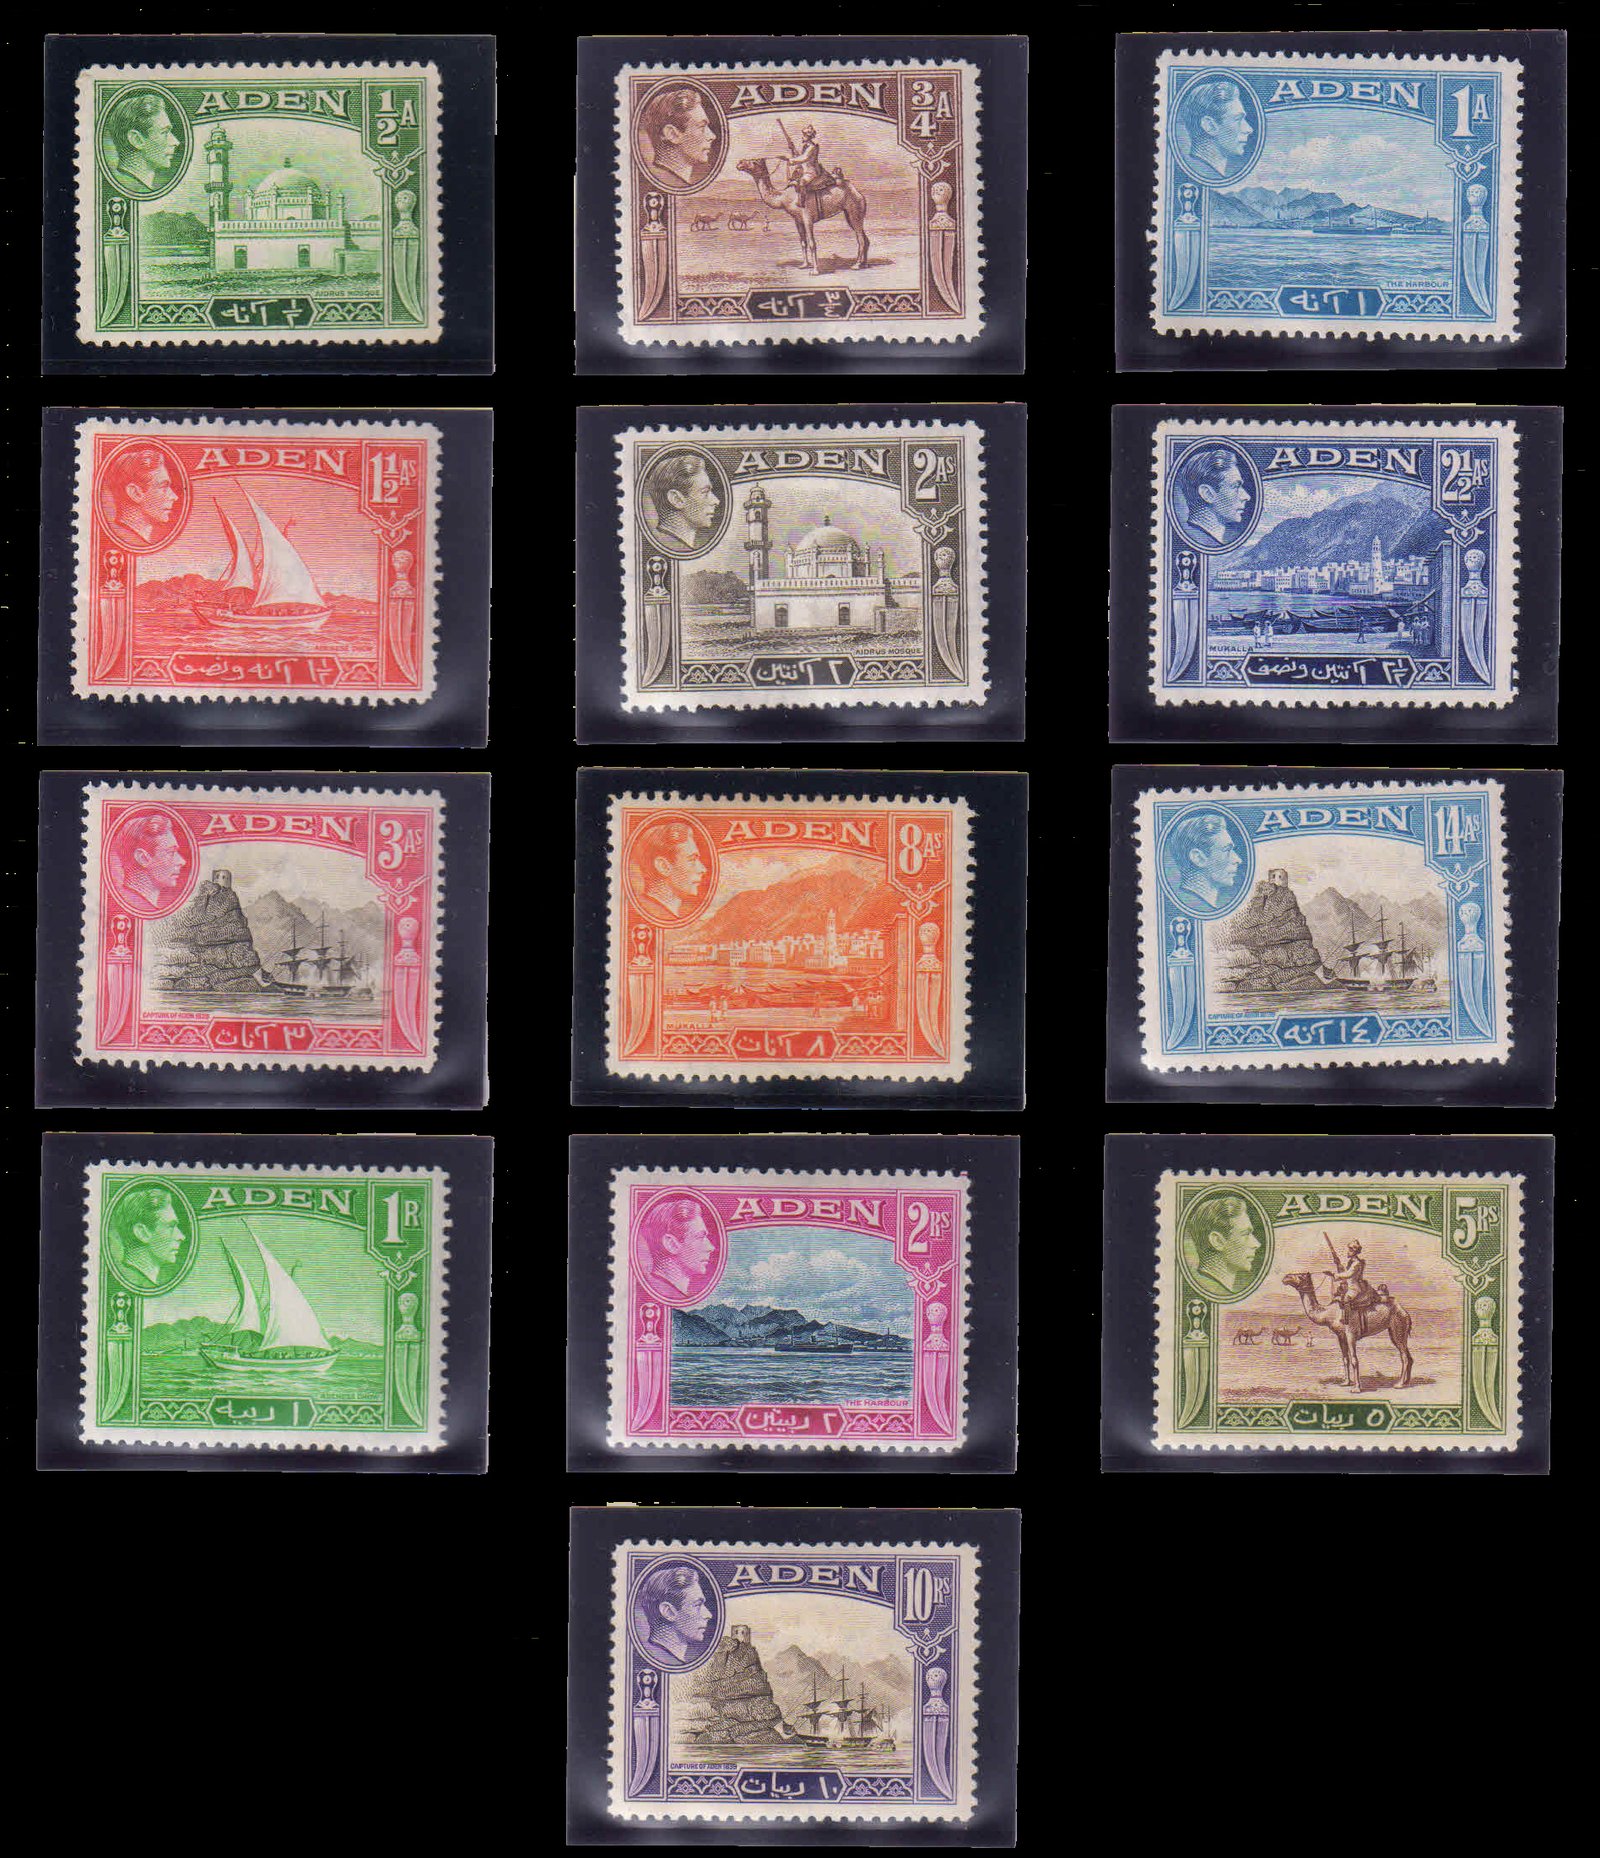 ADEN 1939 - King George VI, Thematic Pictorial Series, Camel, Mosque, Forts, Set of 13-Mint Hinged, S.G. 16-27, Cat. £ 135